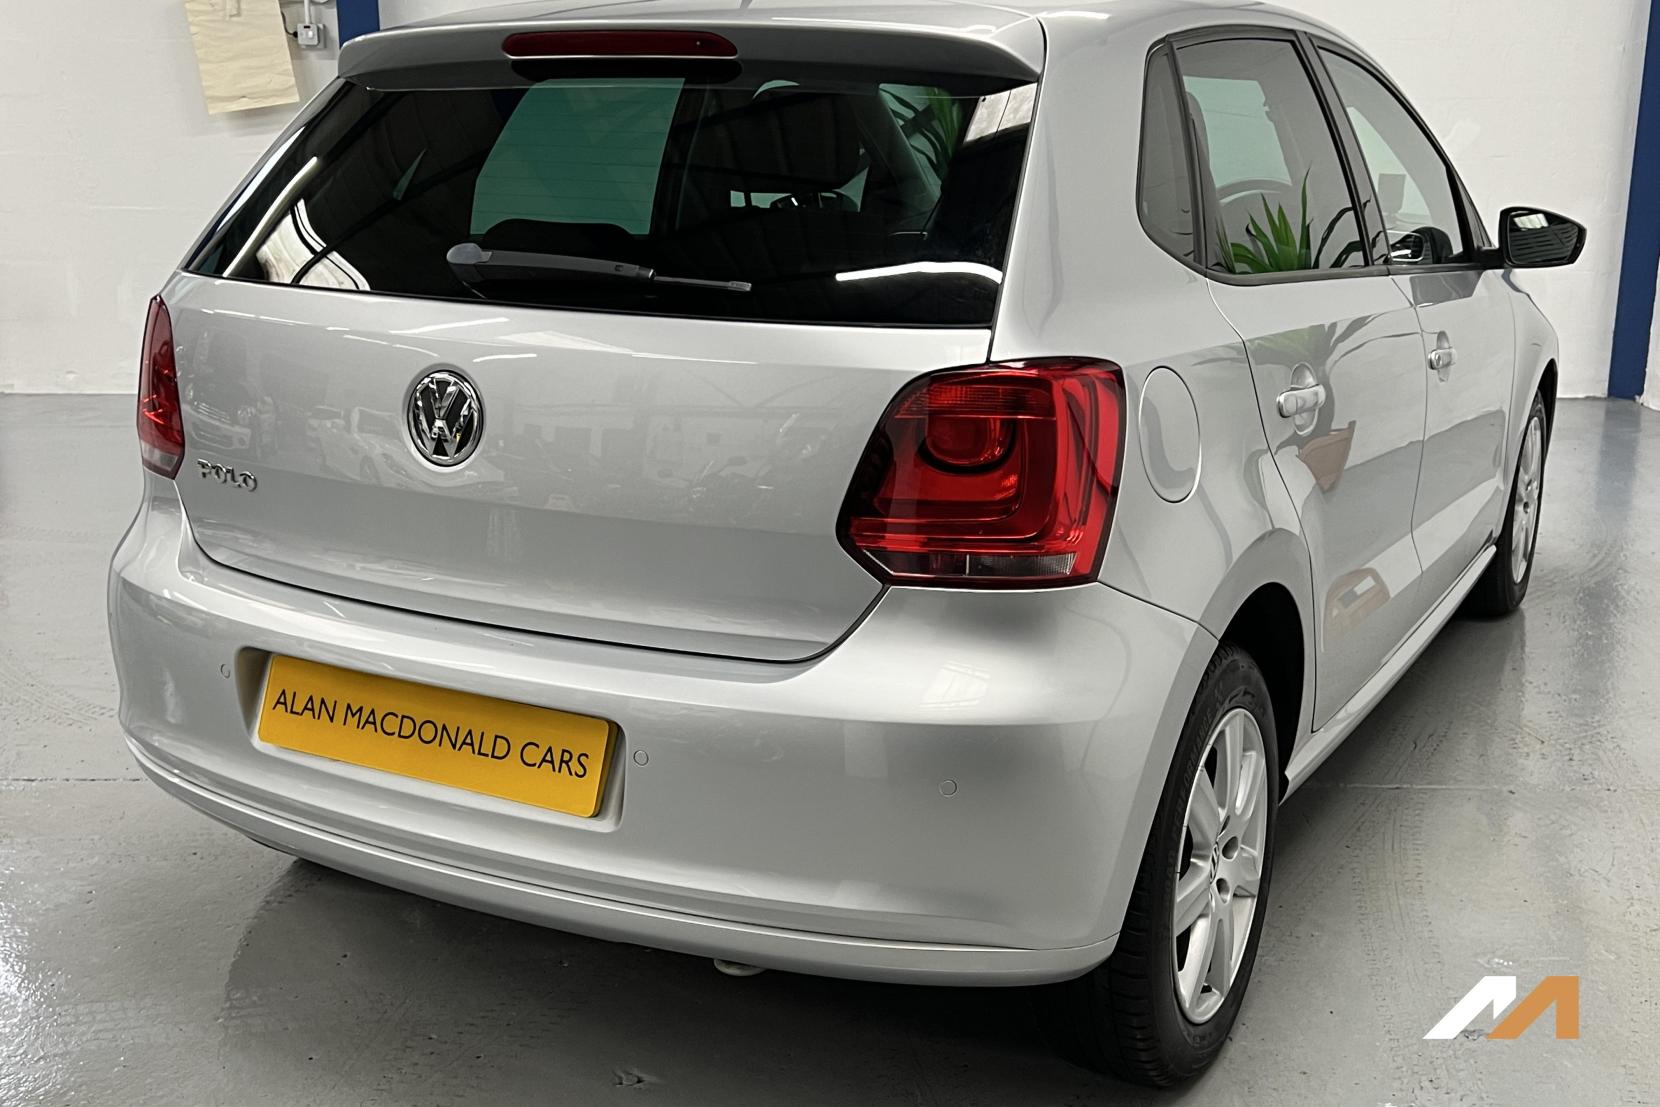 Volkswagen Polo 1.4 Match Edition Hatchback 5dr Petrol Manual Euro 5 (85 ps)